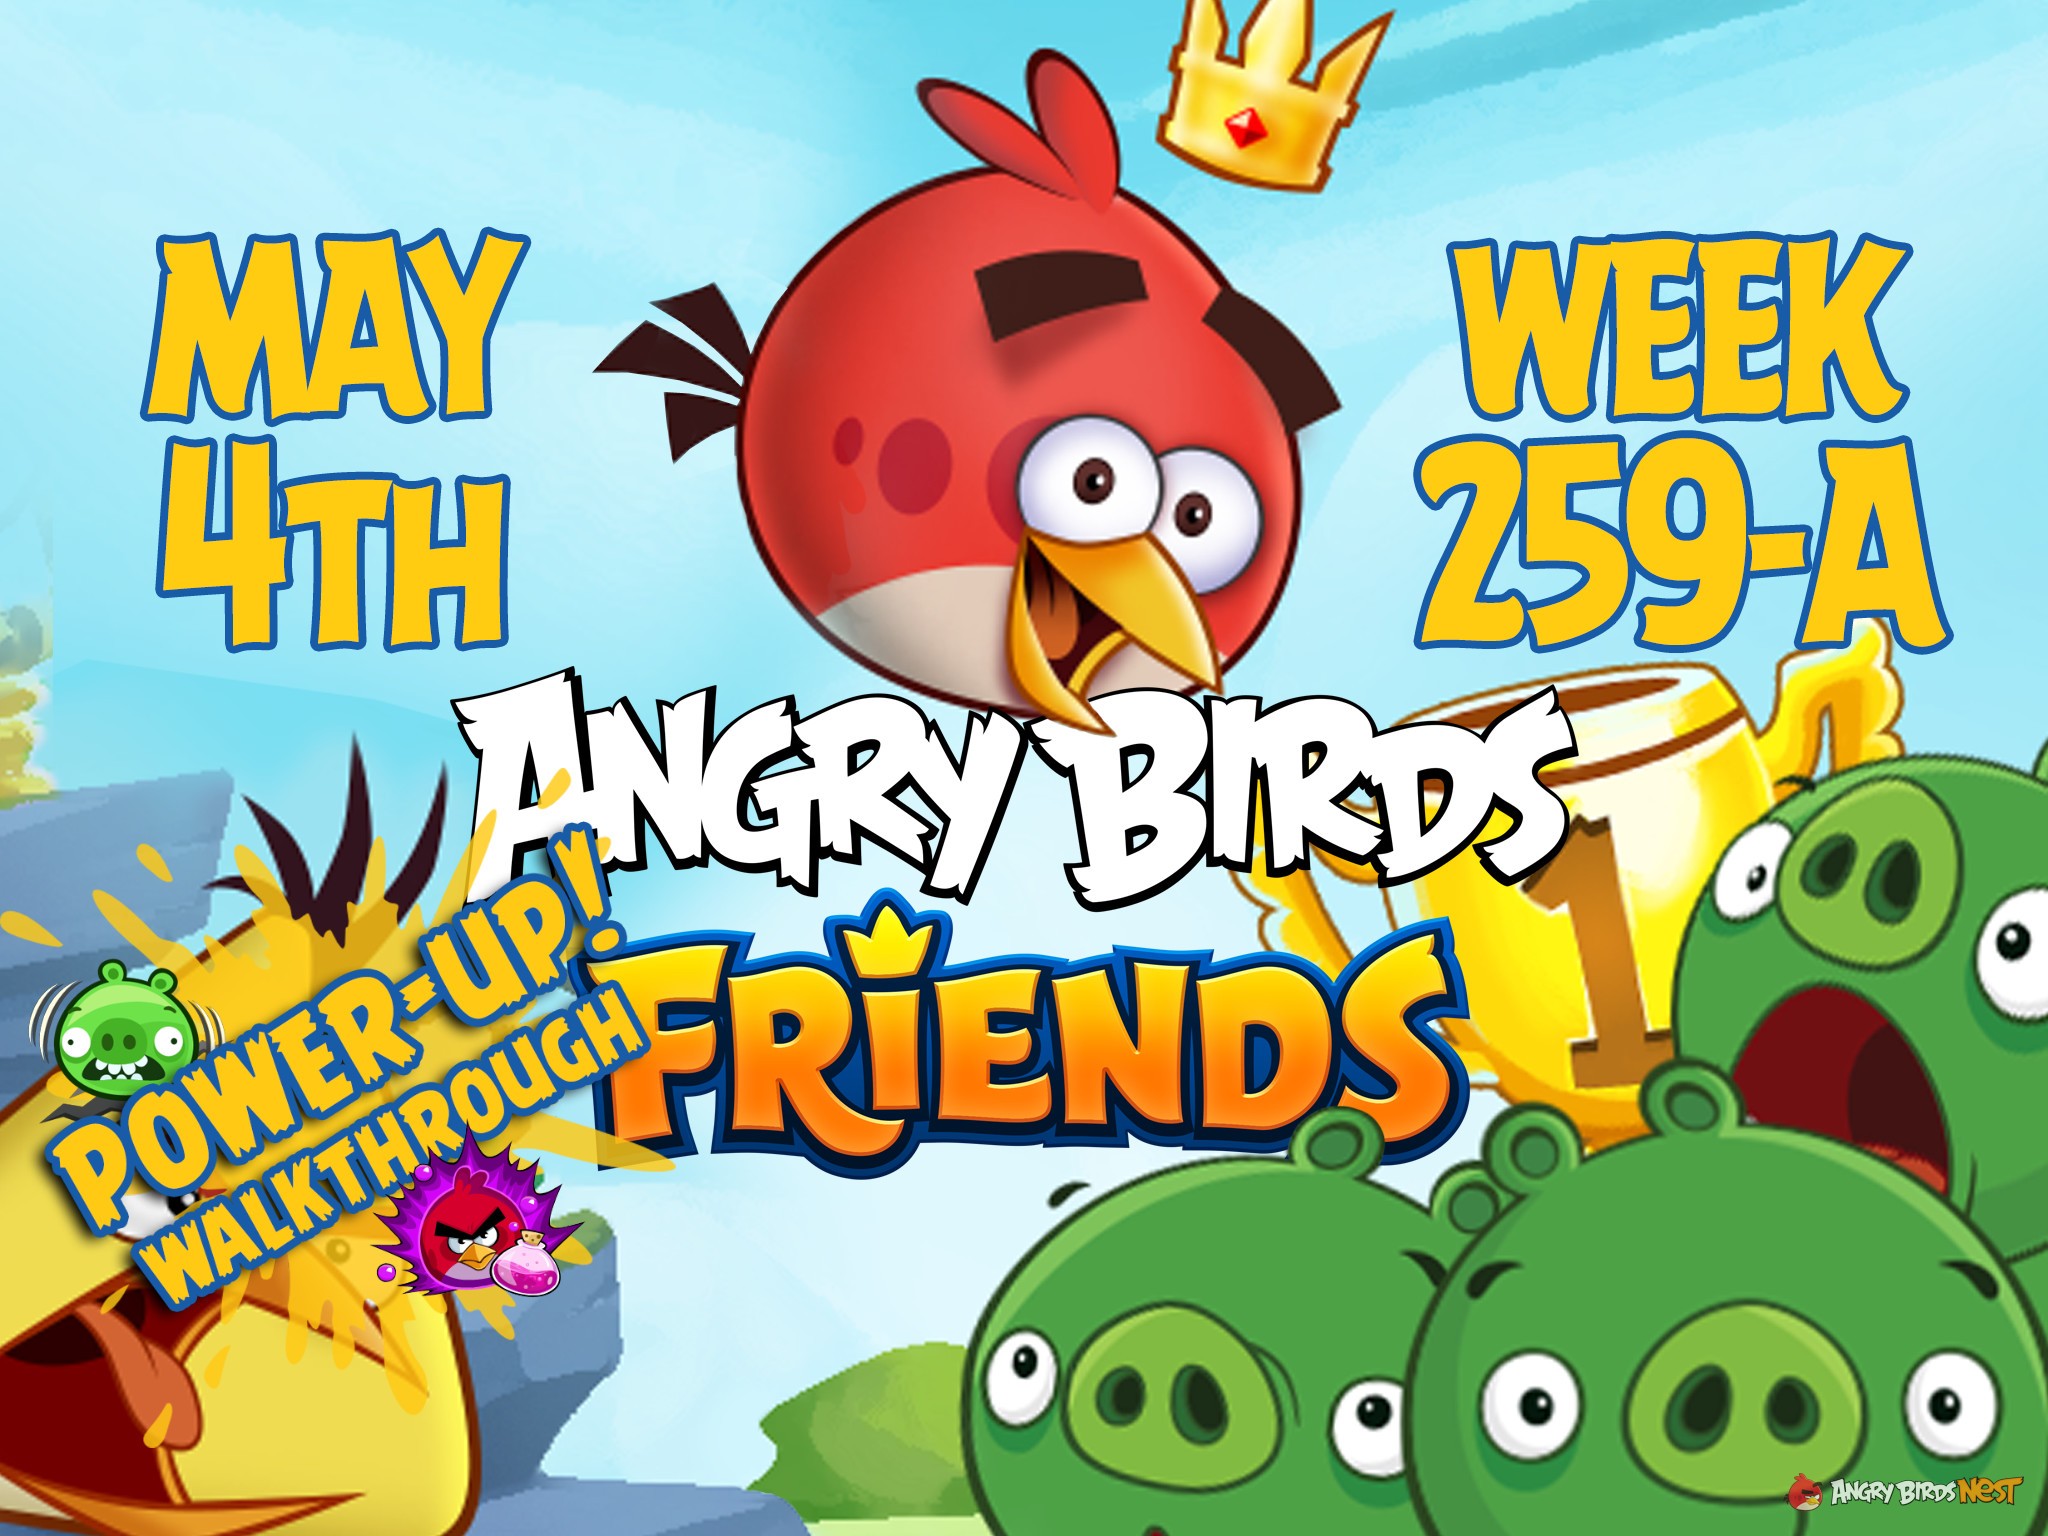 Angry Birds Friends Tournament Week 259-A Feature Image PU